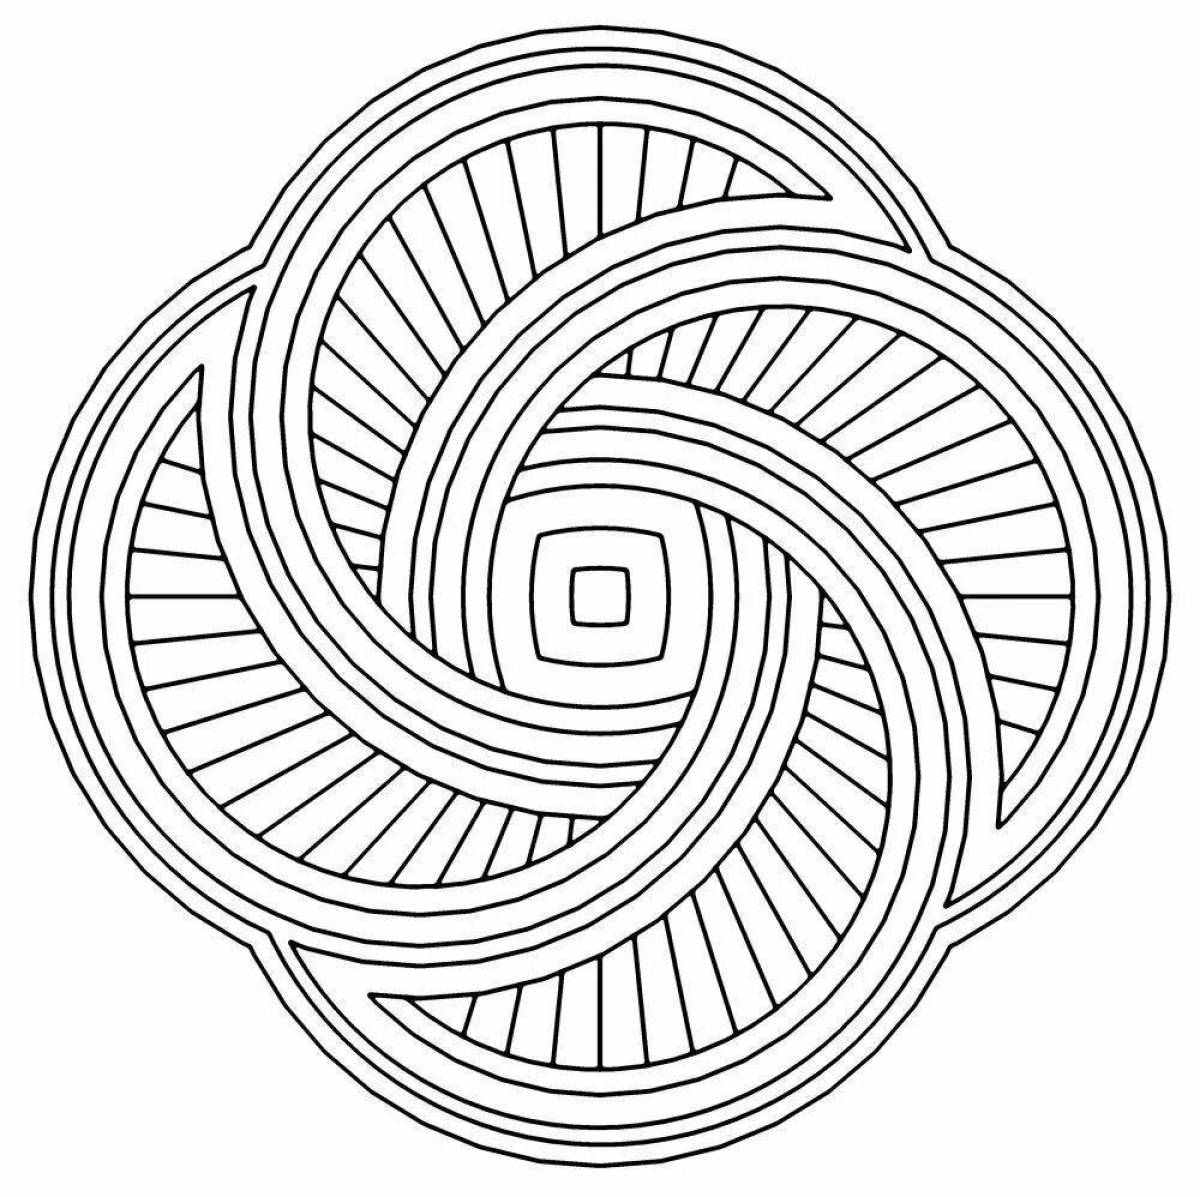 Colorful spiral pattern coloring page